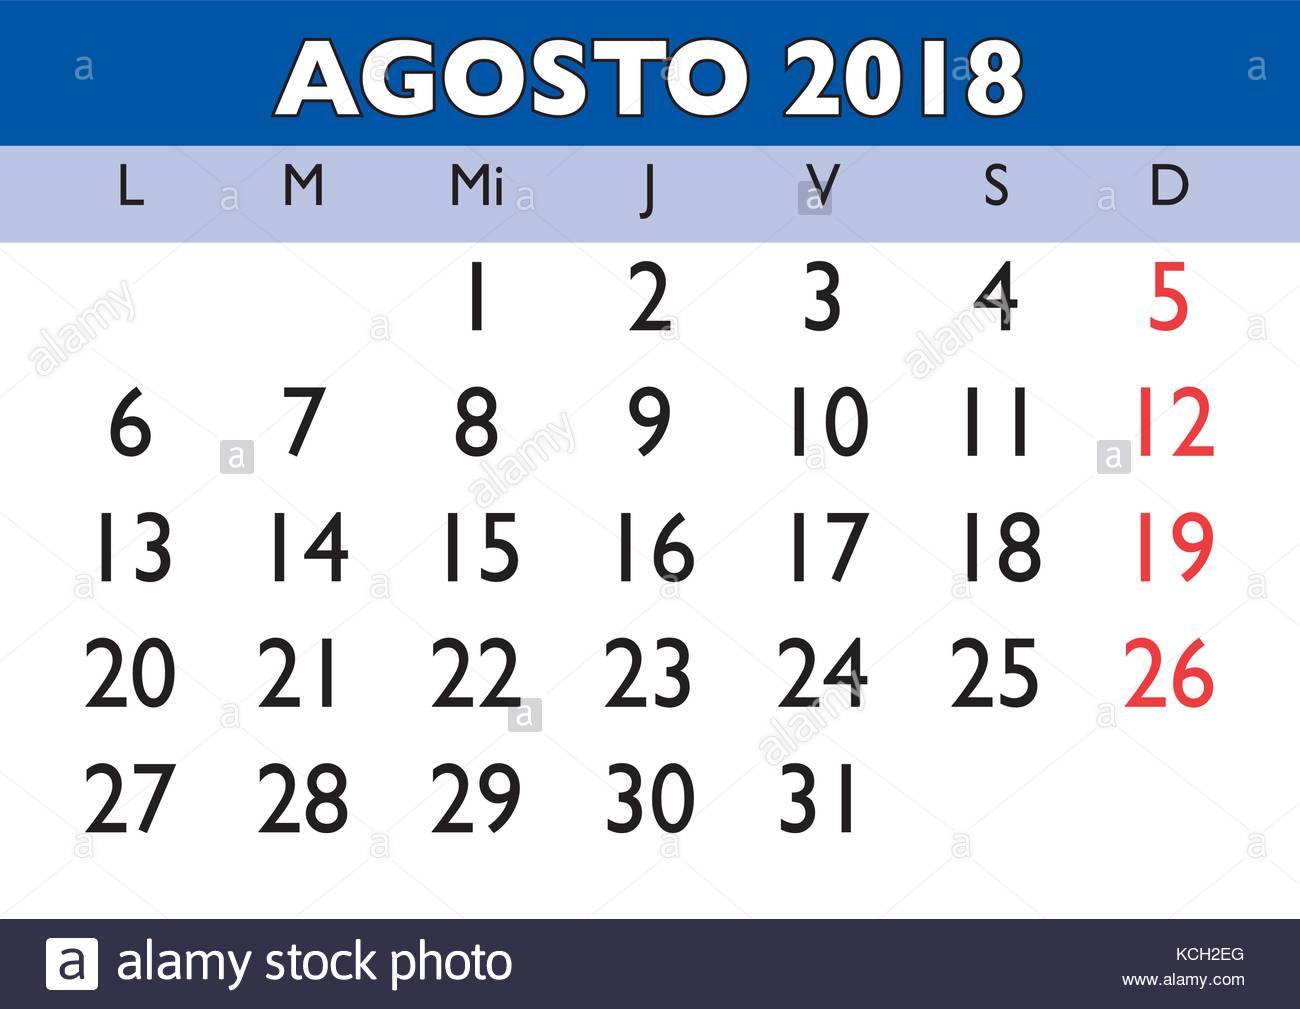 august-month-in-a-year-2018-wall-calendar-in-spanish-agosto-2018-stock